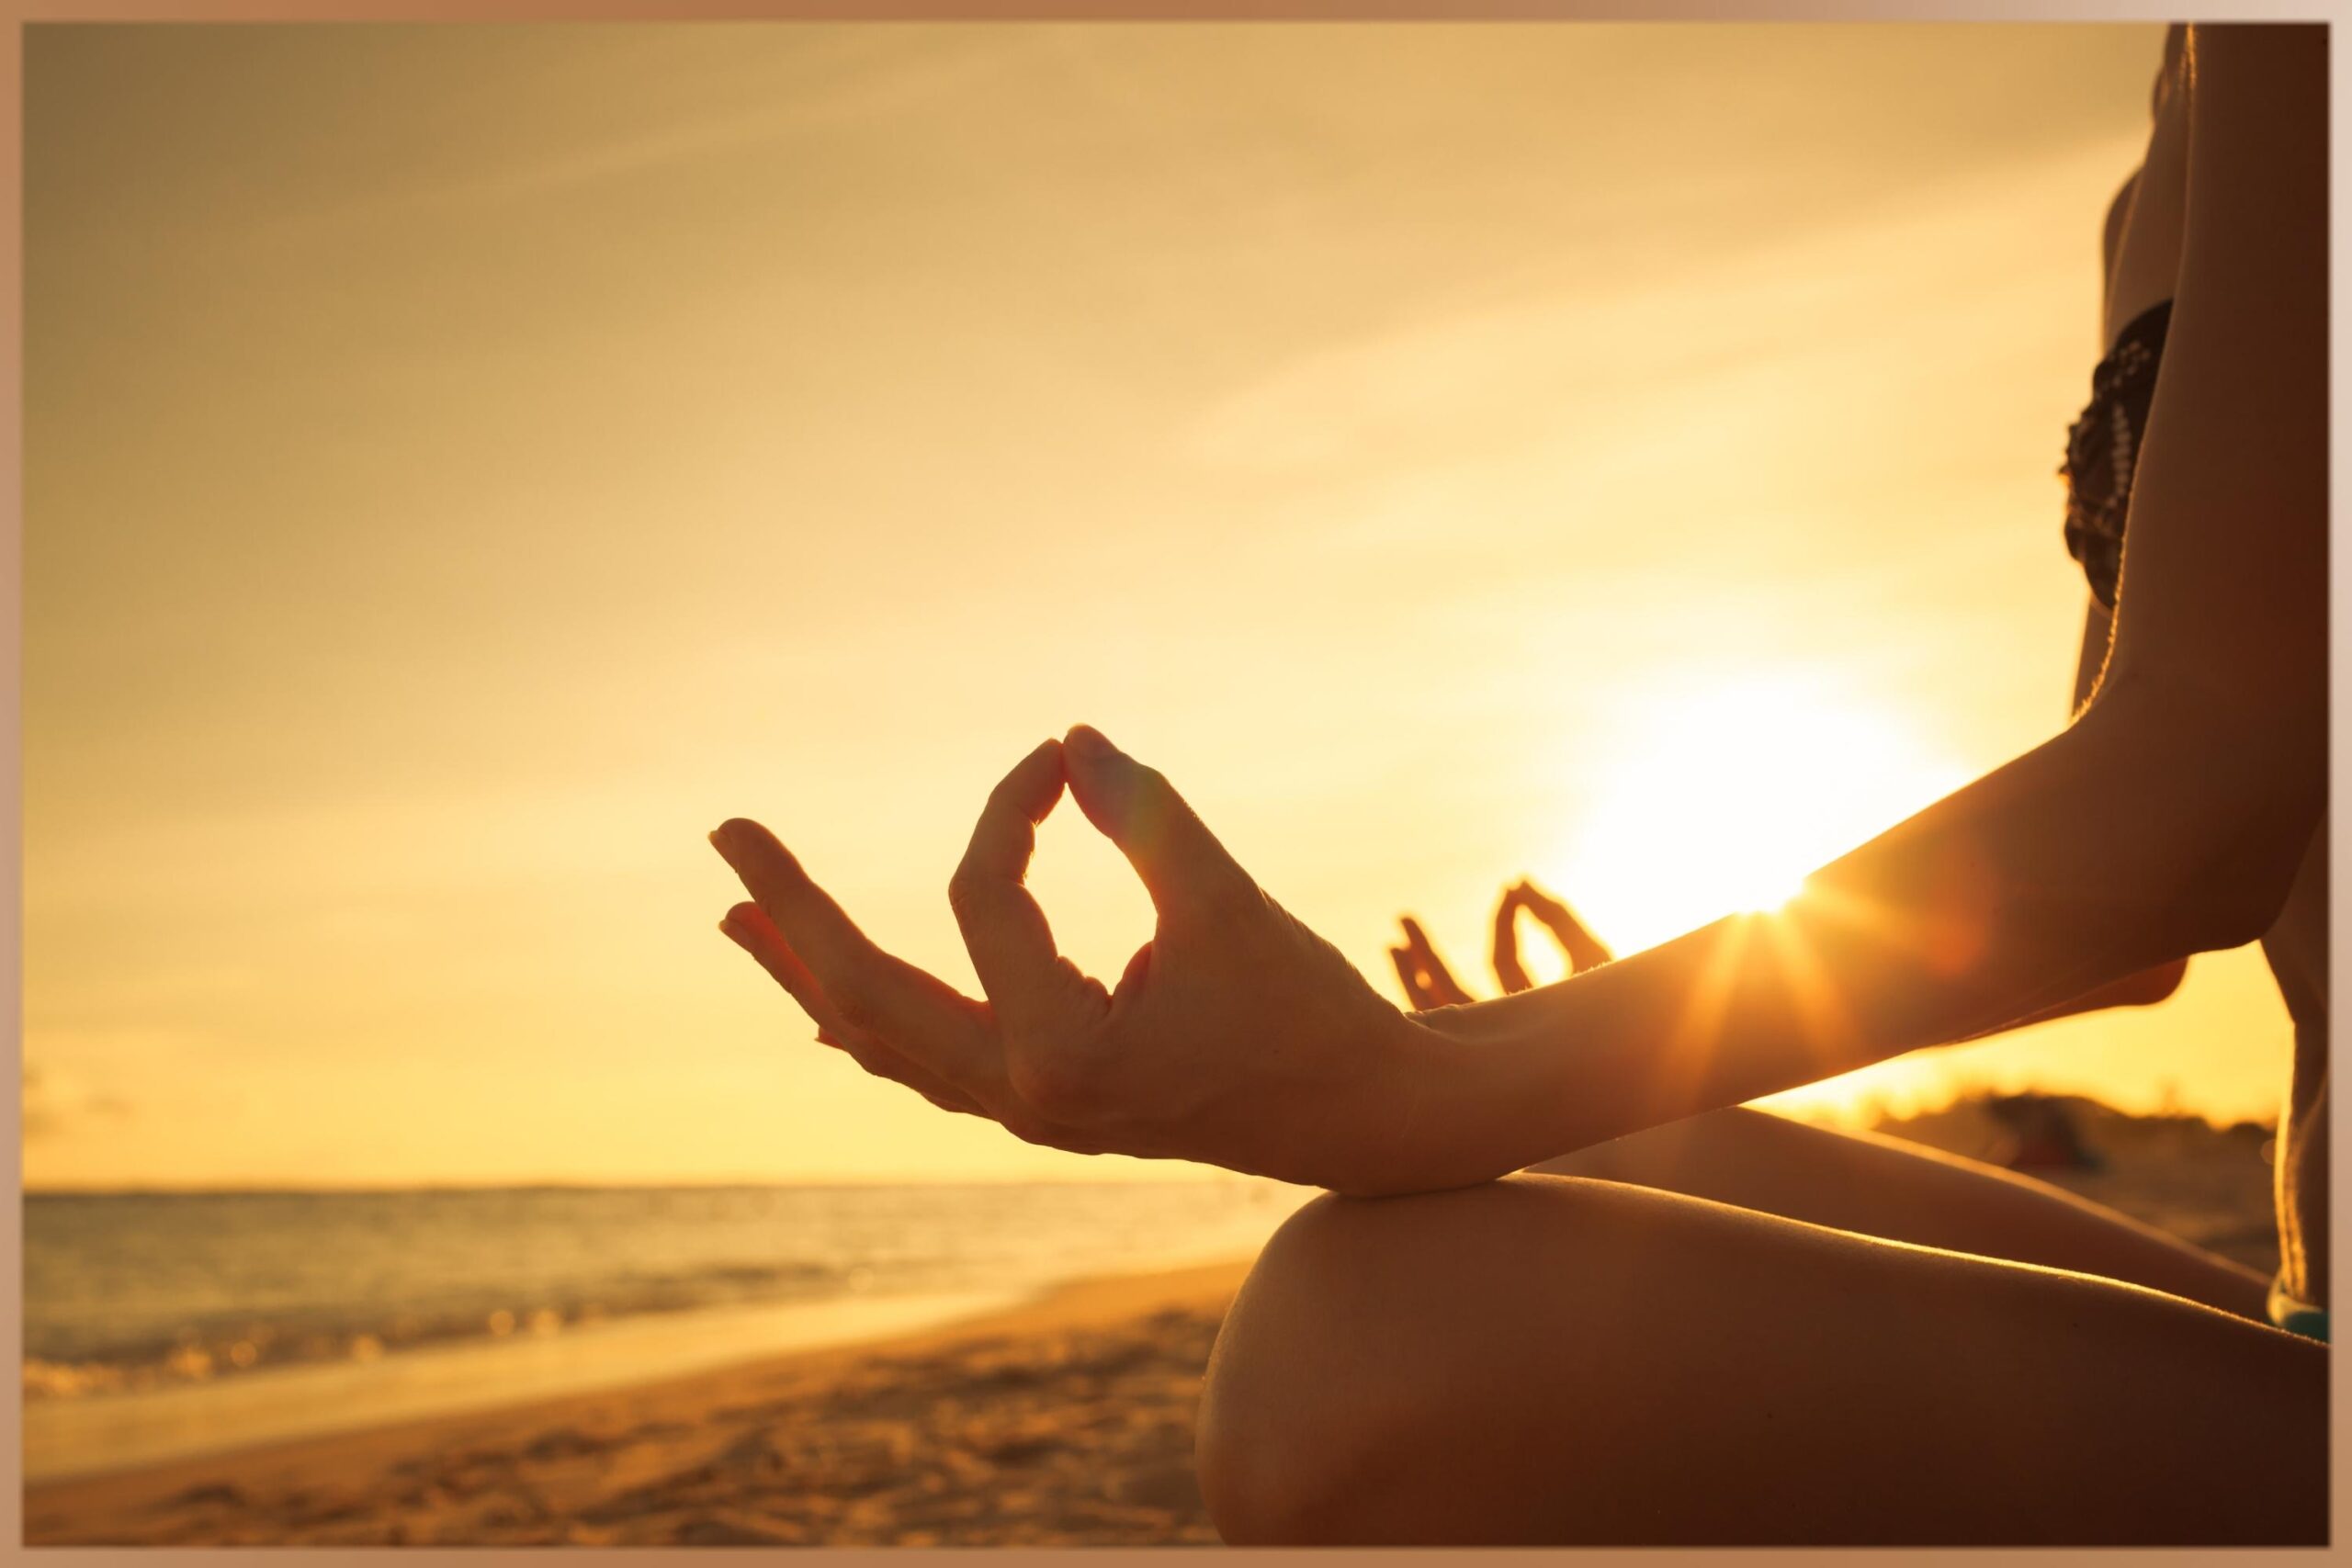 Woman meditates on the beach for inner peace while sun is shining